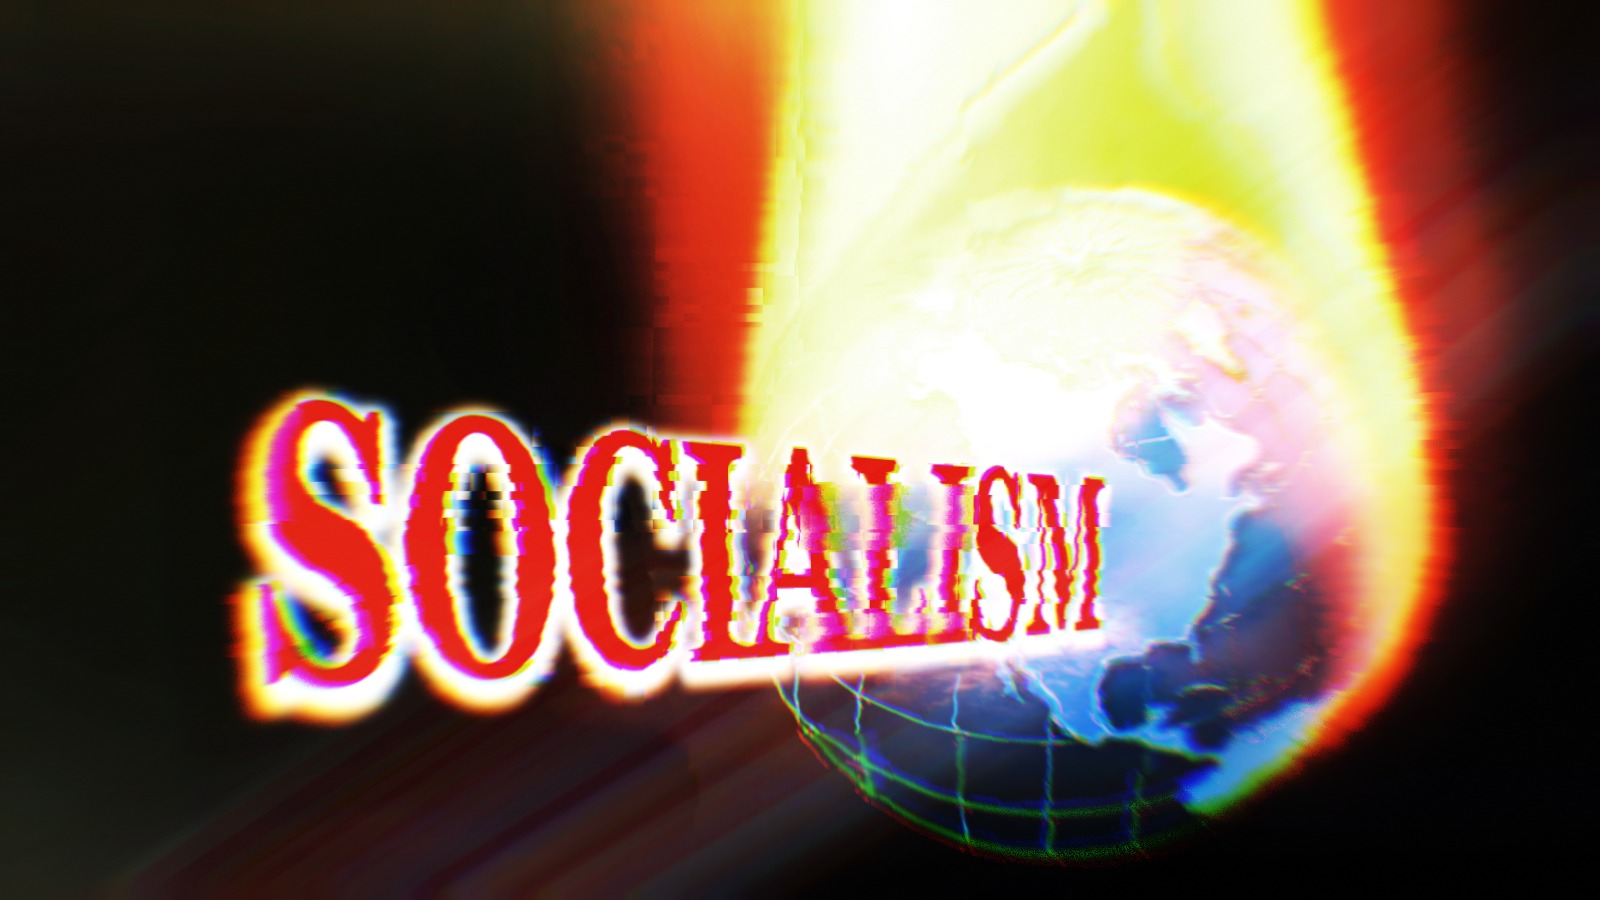 Text that says Socialism over a globe